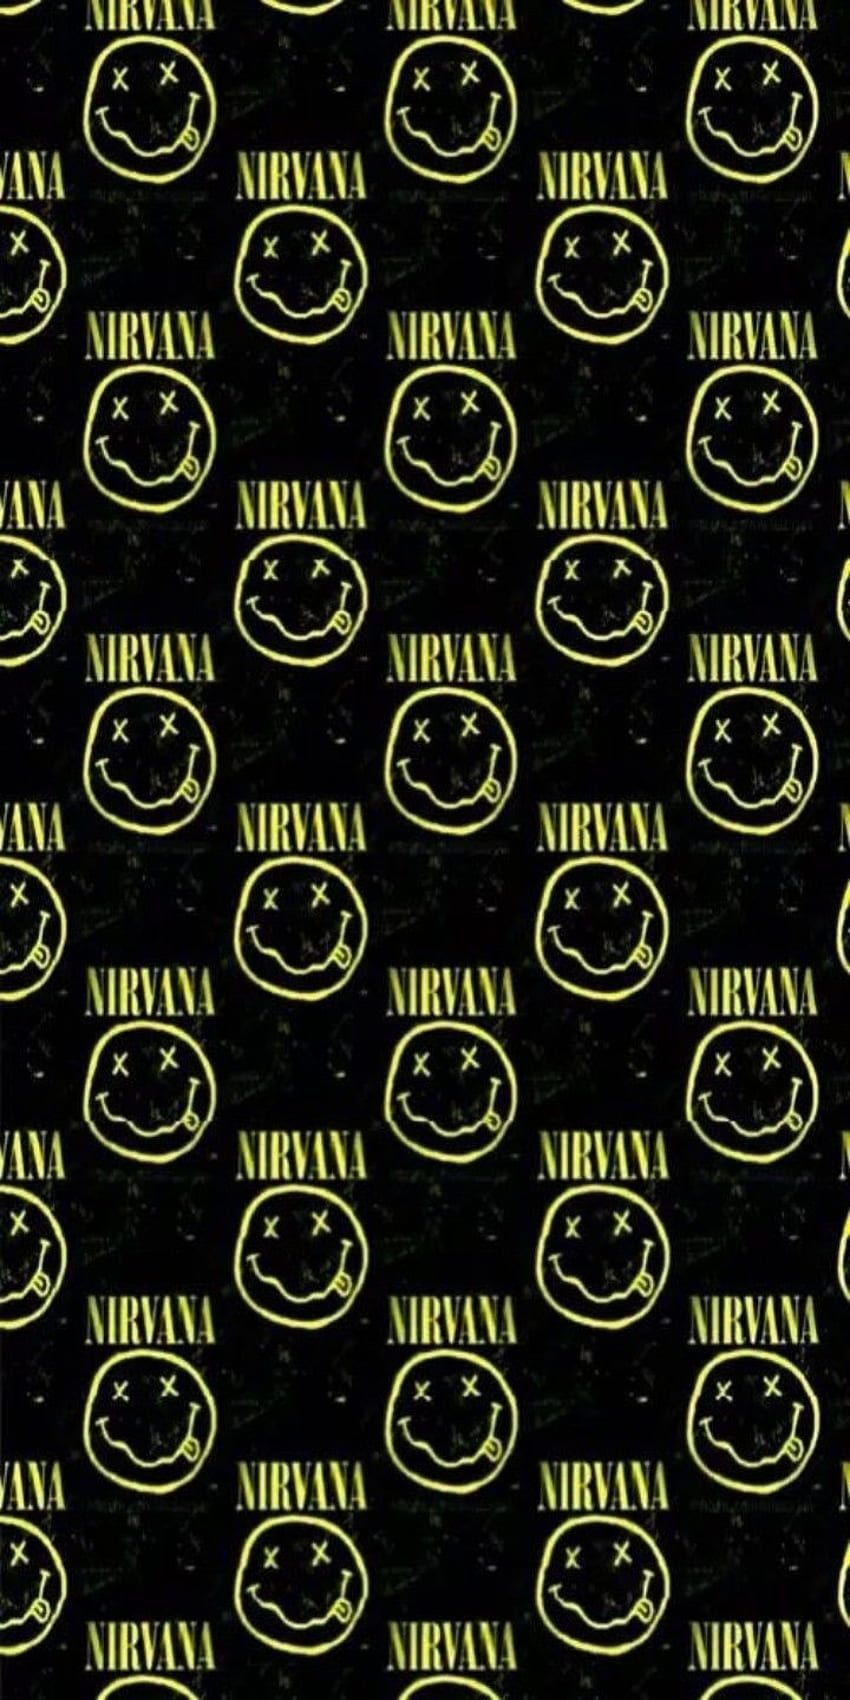 A pattern of smiley faces on black background - Nirvana